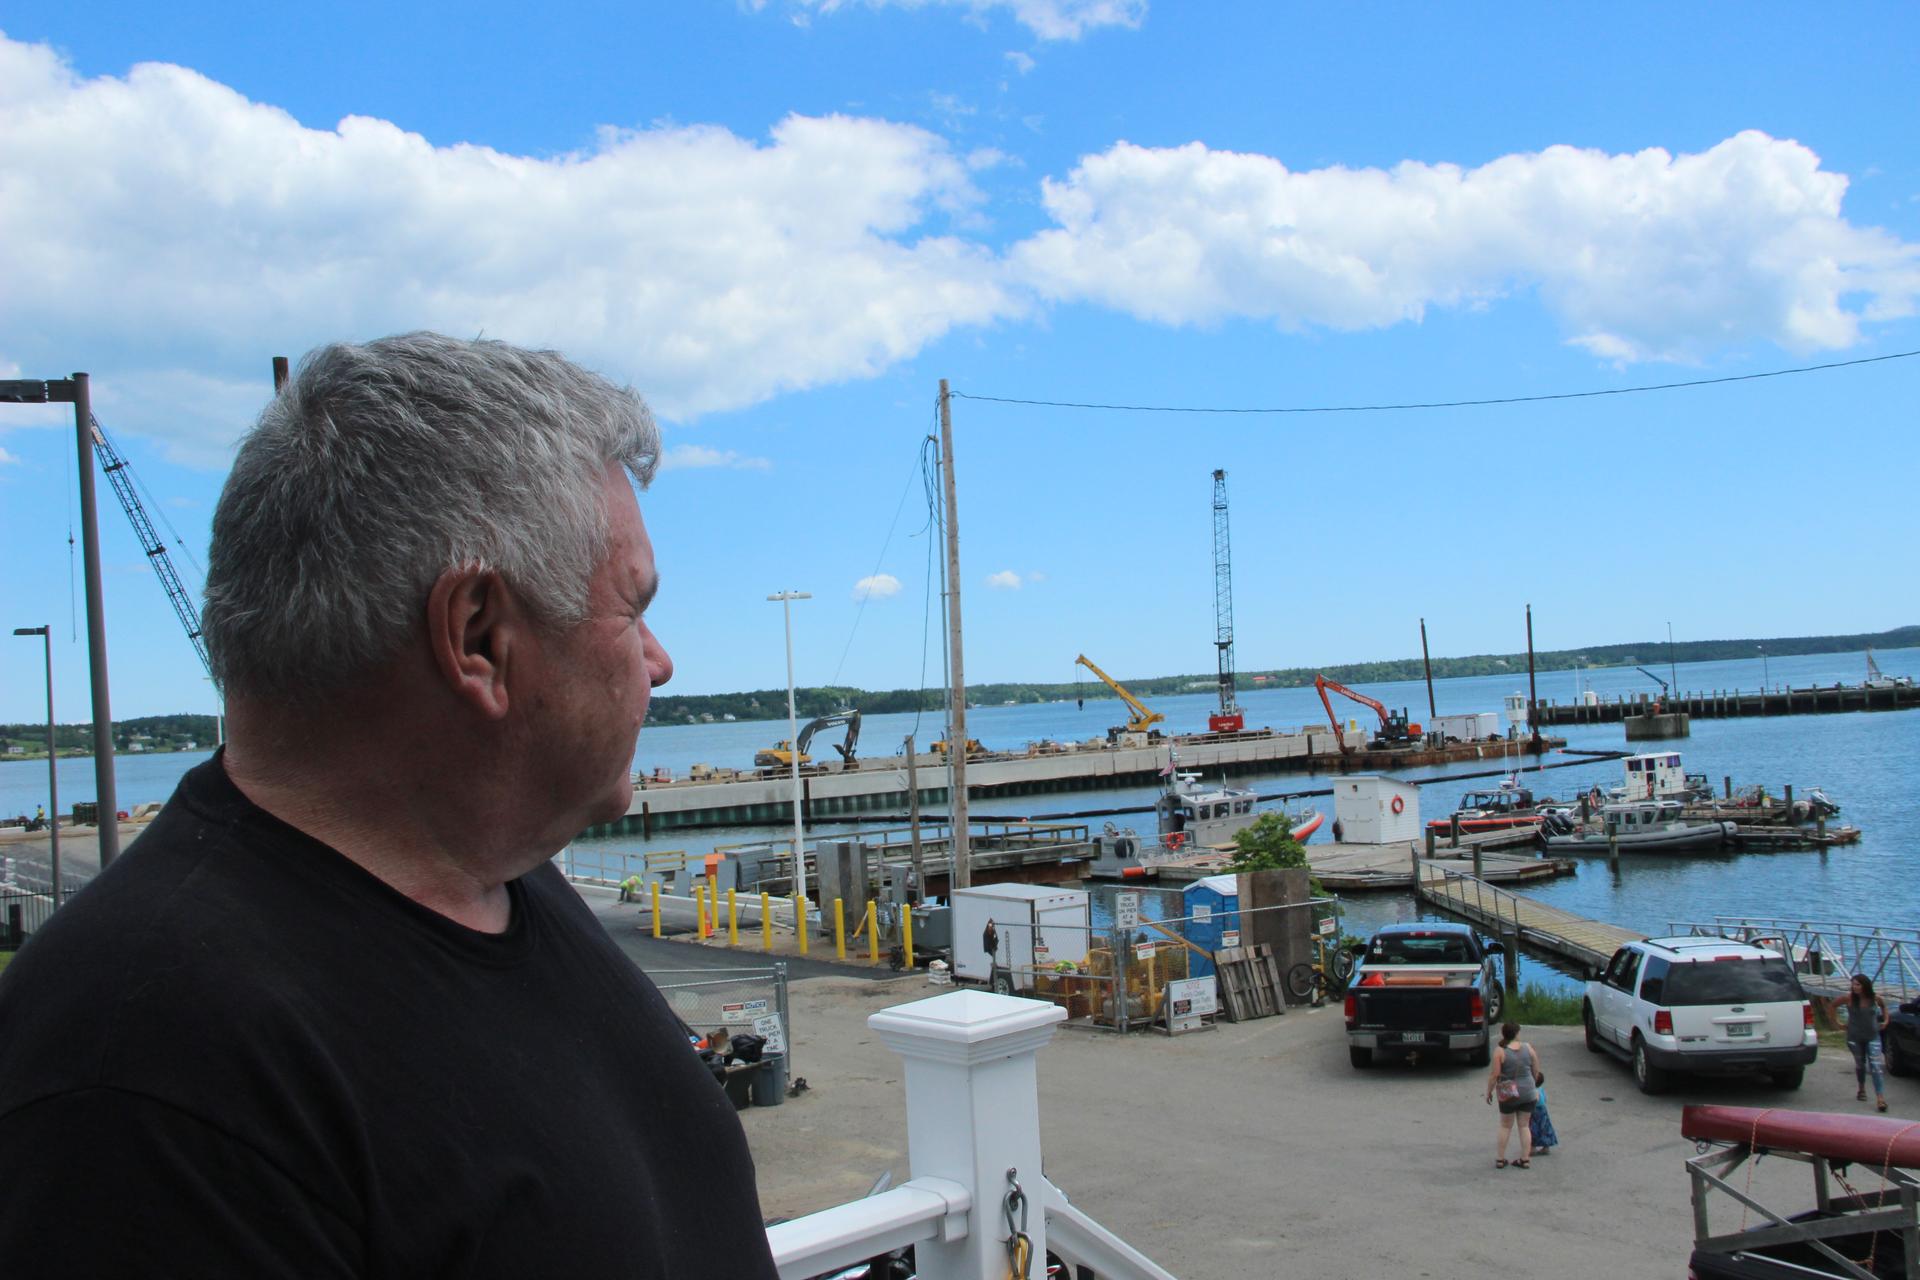 Ship pilot Bob Peacock guides vessels into the port of Eastport. His business was hurt when the shipment of cows to Turkey stopped in 2014.